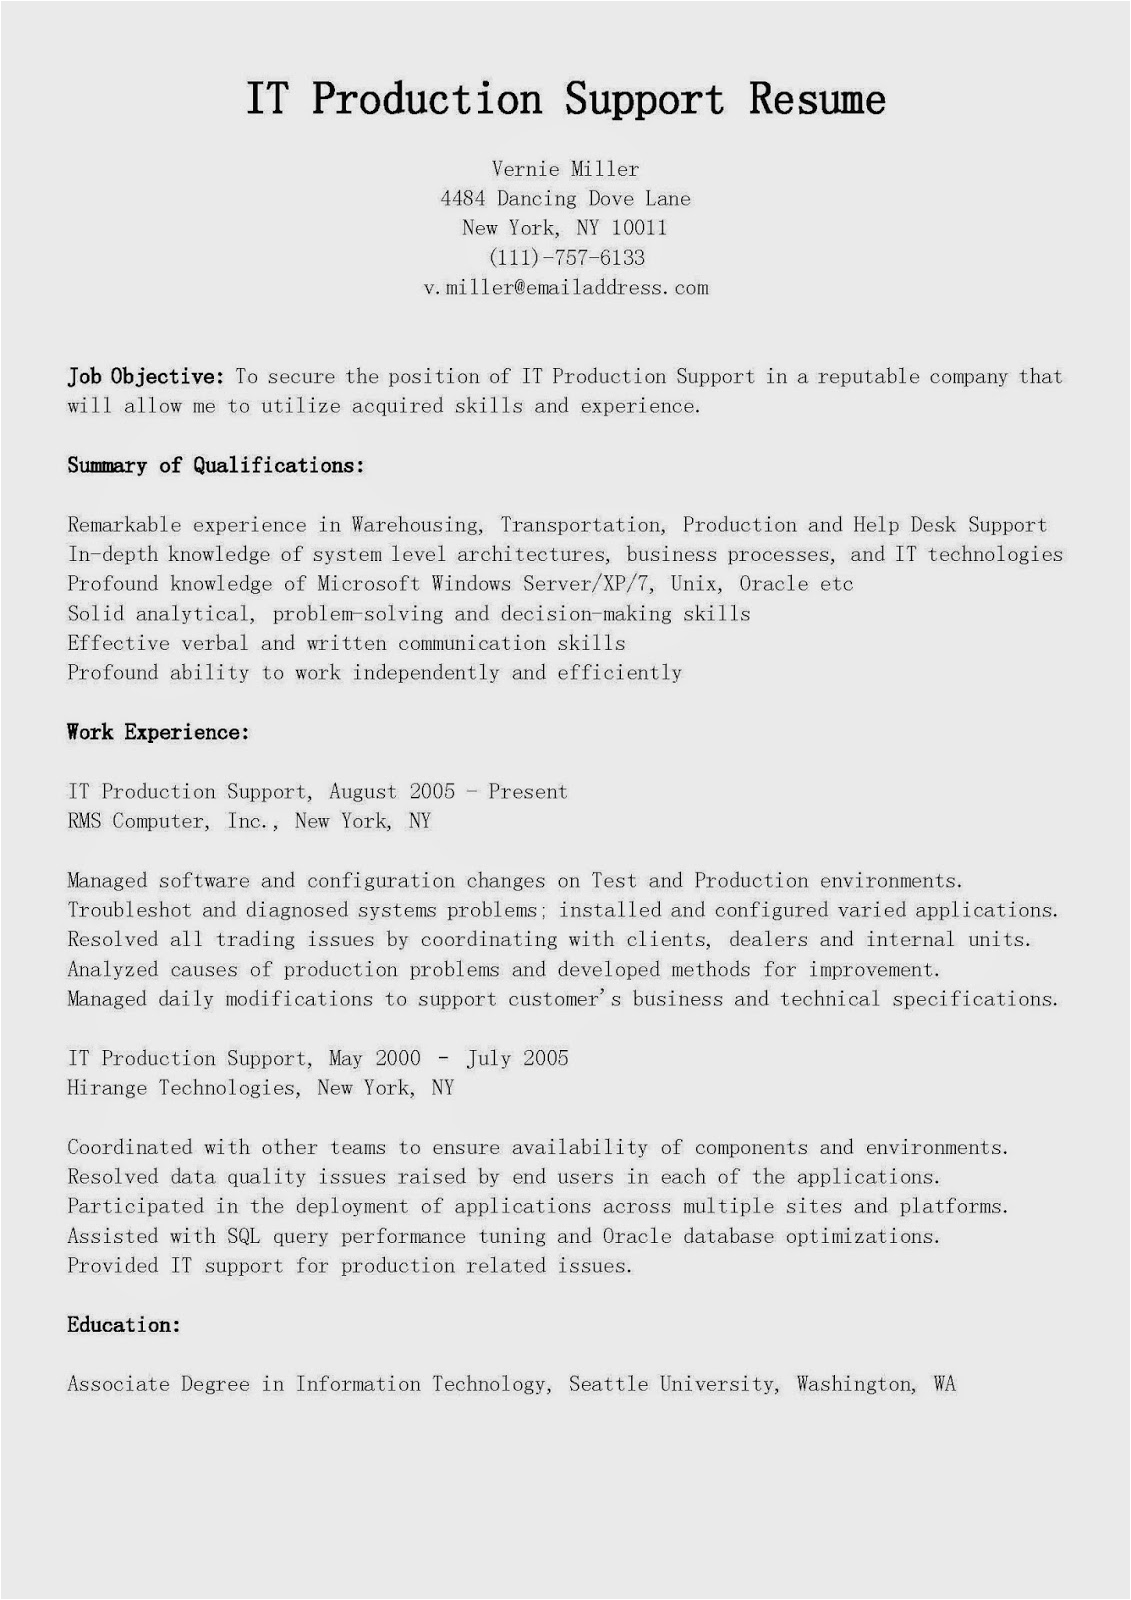 Sample Resume for Mainframe Production Support Resume Samples It Production Support Resume Sample